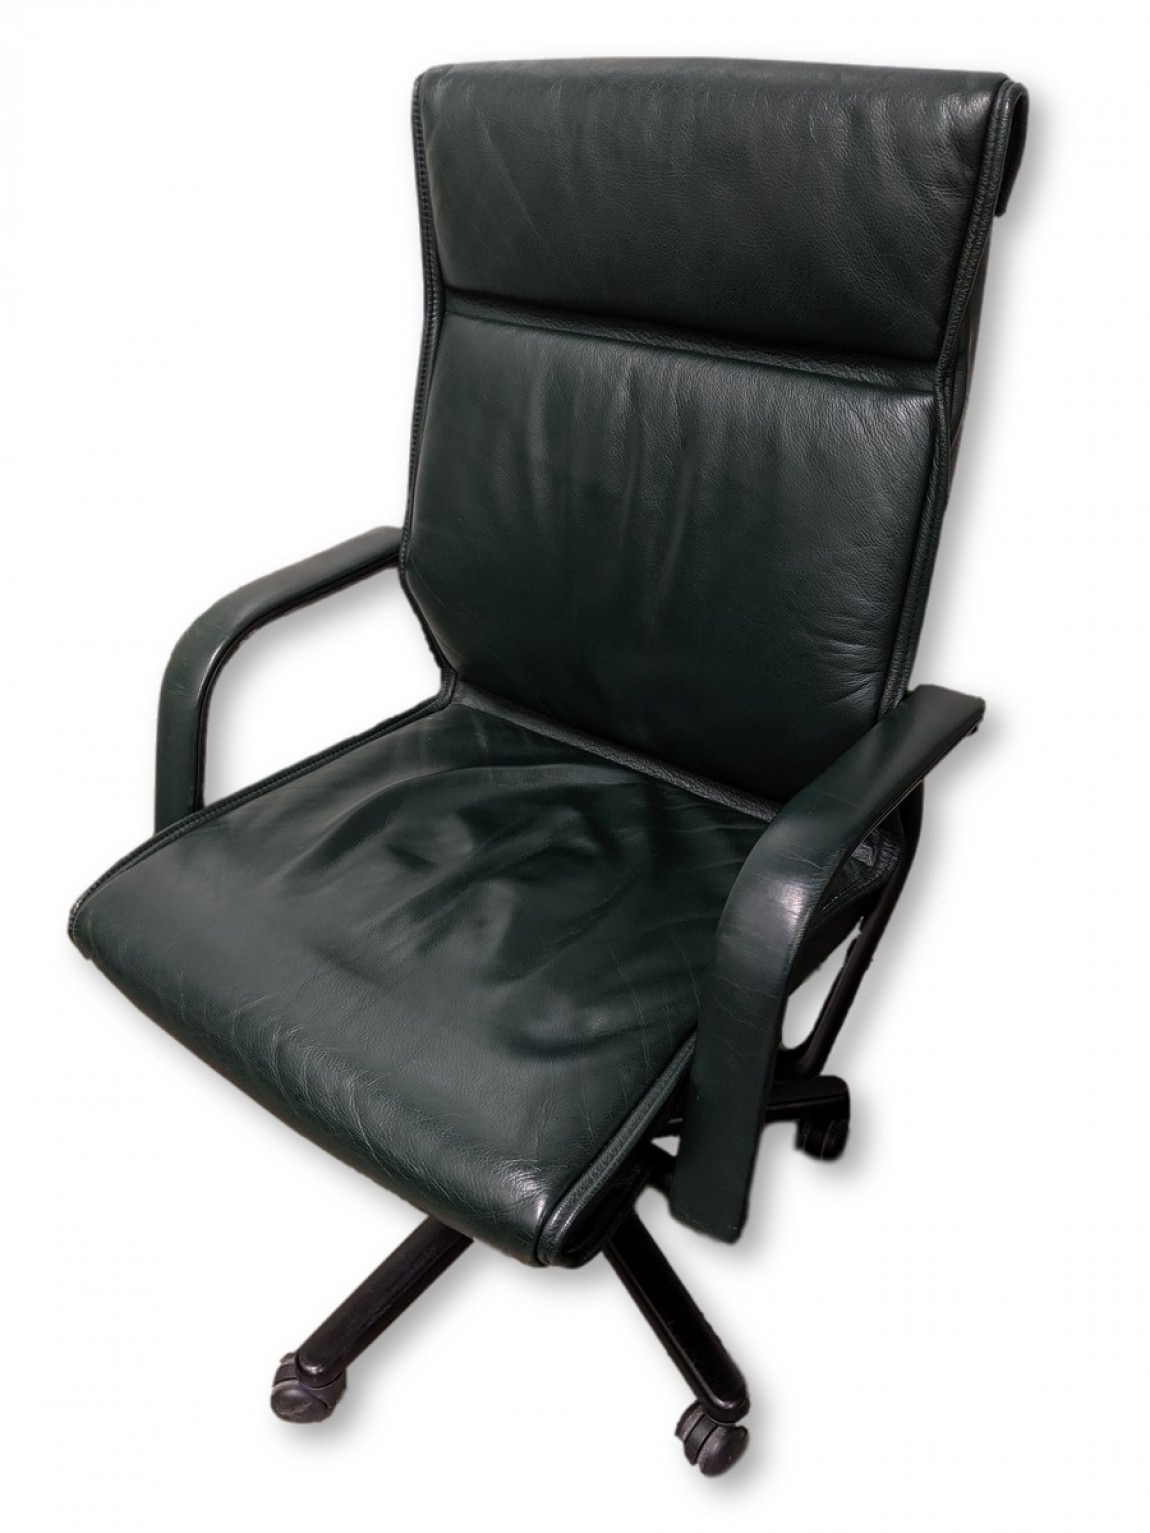 Vecta Green Leather High-Back Office Chairs